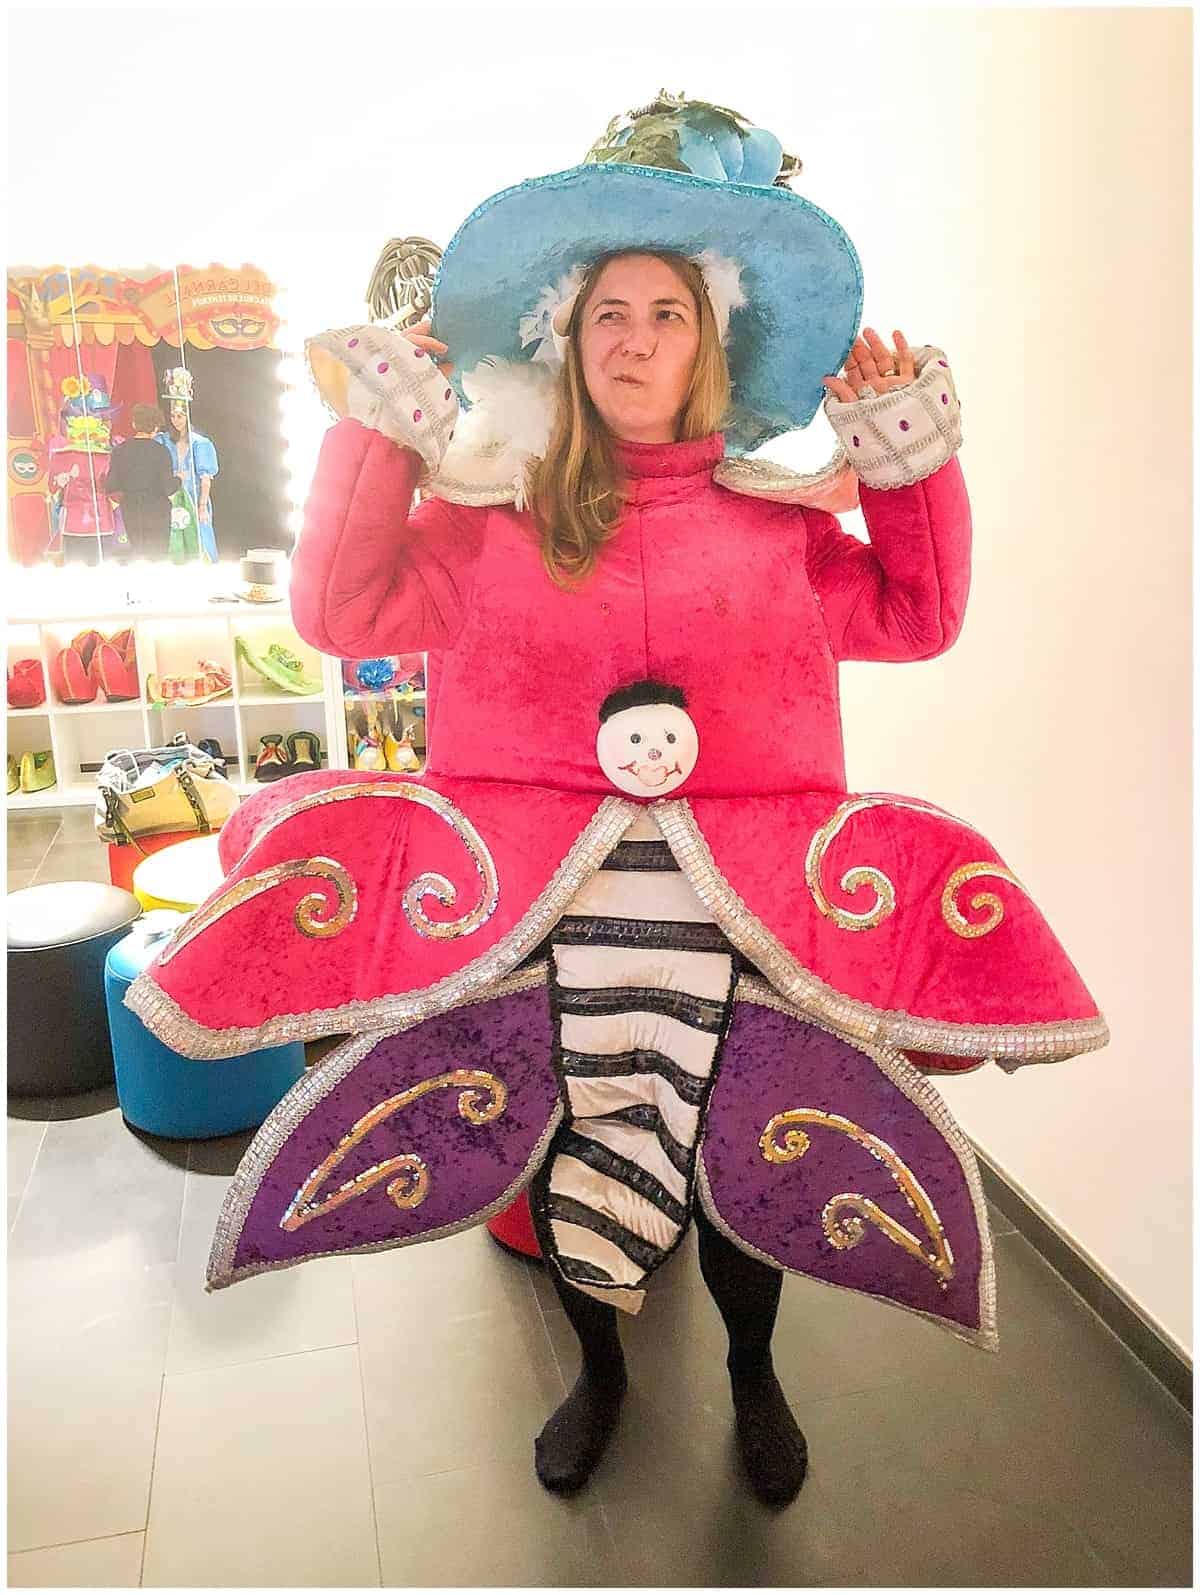 Abigail King in Tenerife Carnival Museum in a quirky costume